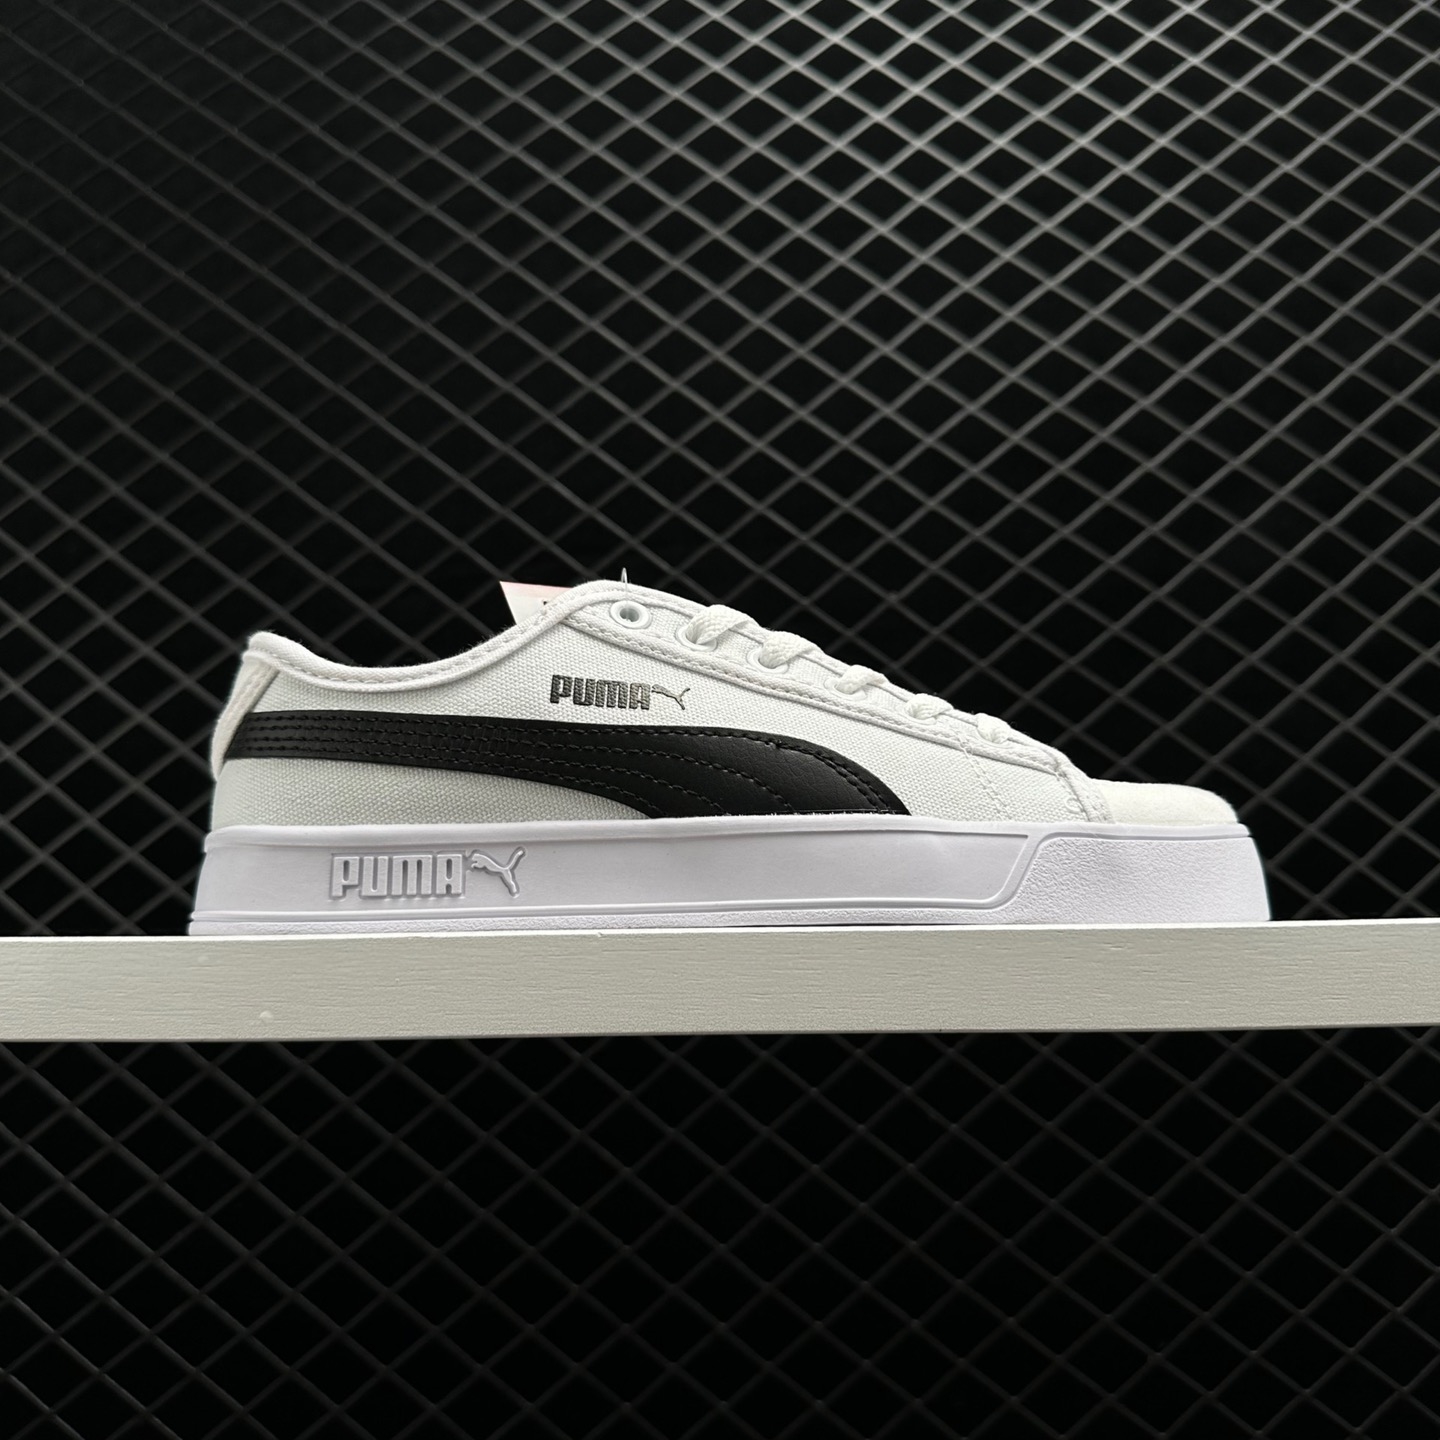 Puma Wmns Vikky Stacked 'White Black' 369143 07 – Stylish and Trendy Sneakers for Women